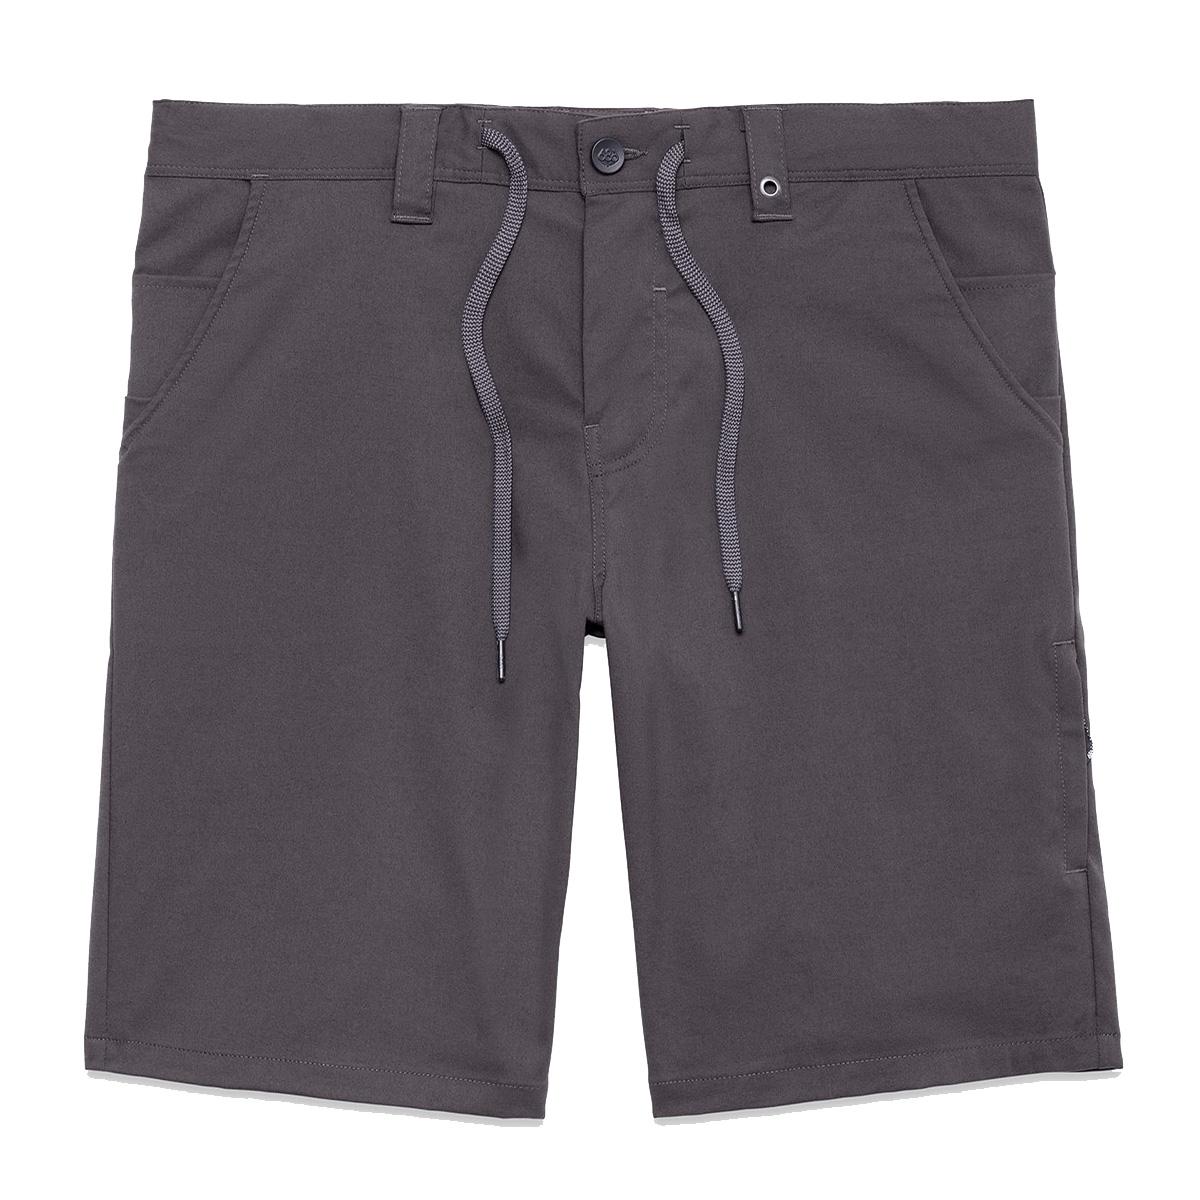 686 Everywhere Hybrid Shorts - Relaxed Fit Men's